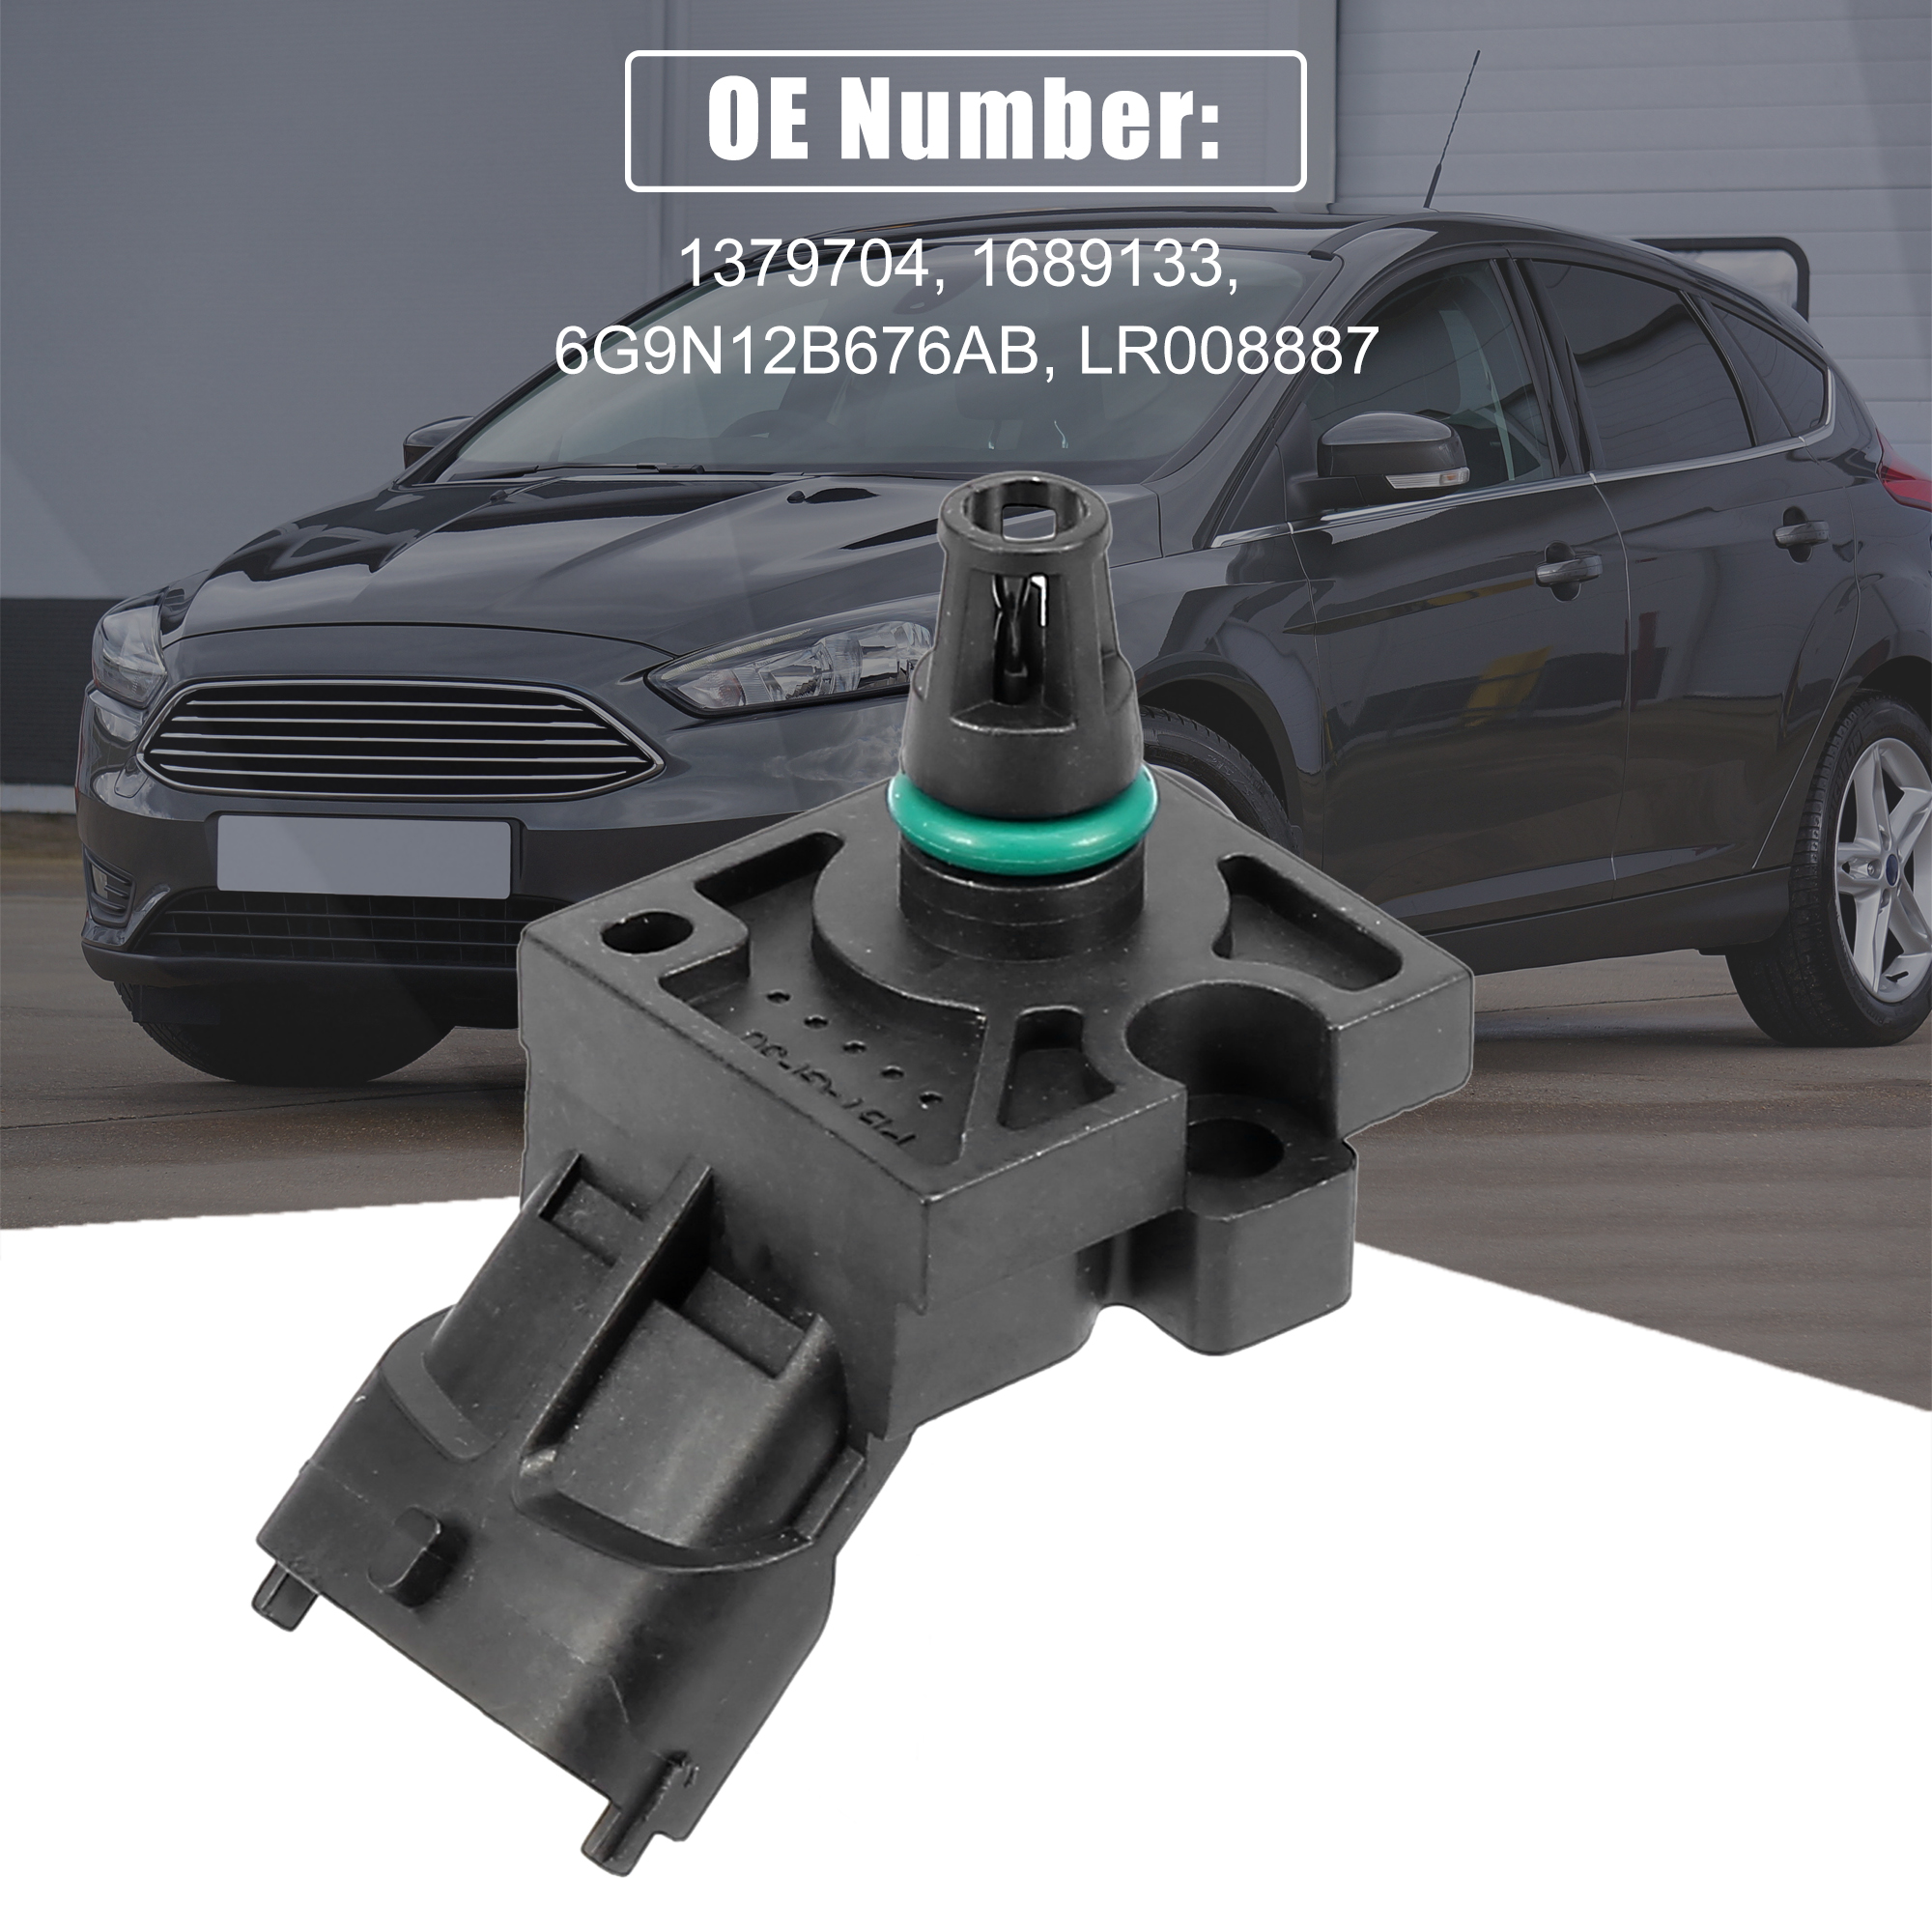 Intake Manifold Absolute Pressure MAP Sensor 1379704 1689133 6G9N12B676AB LR008887 for Ford - image 2 of 6